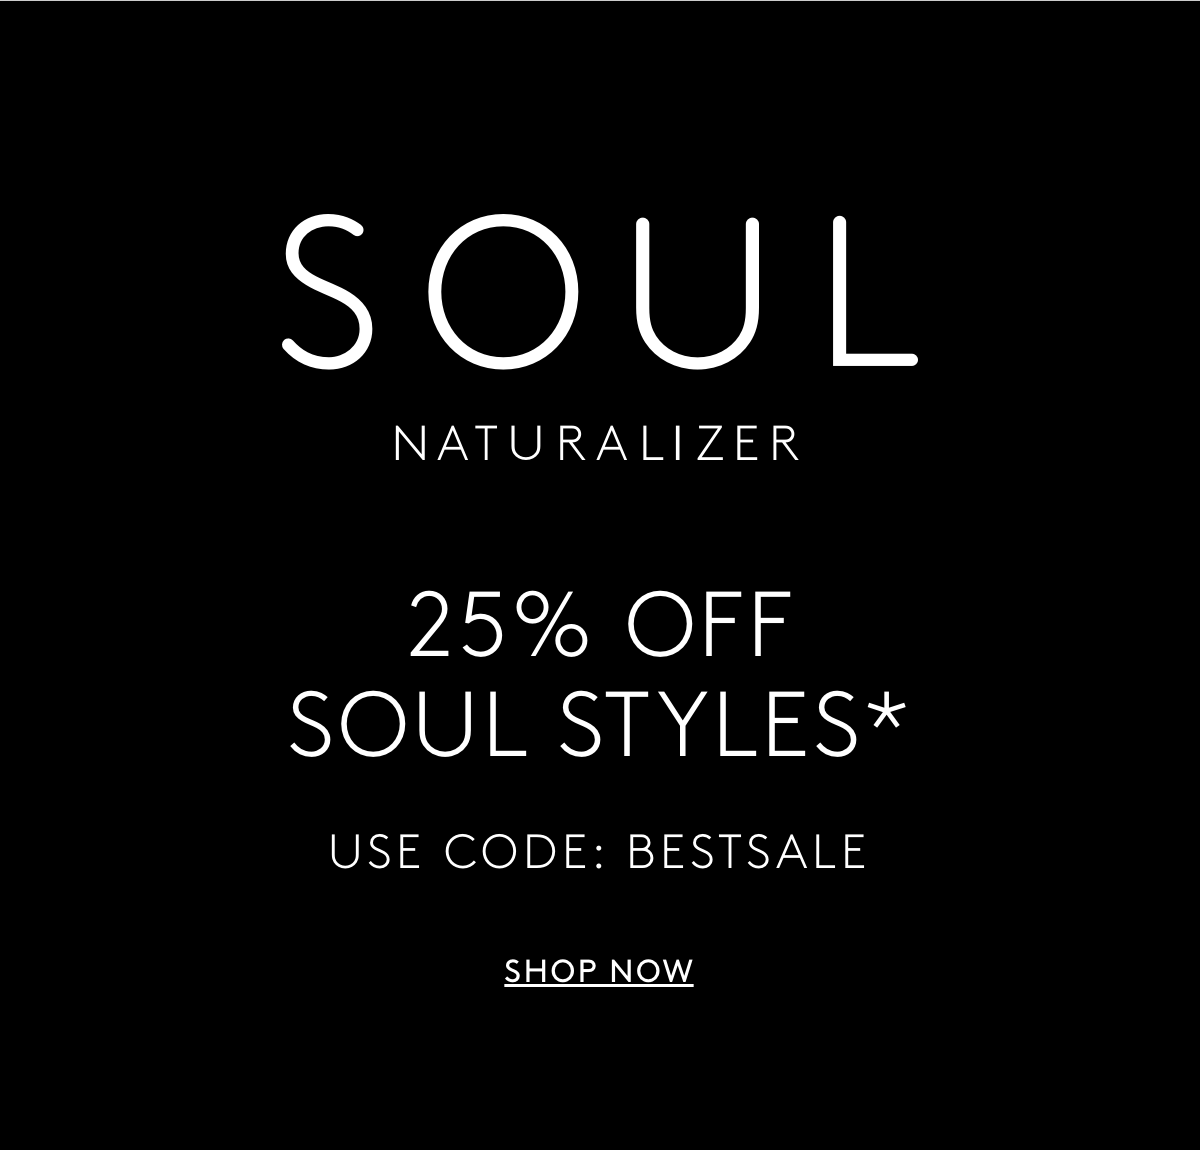 SOUL NATURALIZER 25% OFF SOUL STYLES* USE CODE: BESTSALE | SHOP NOW